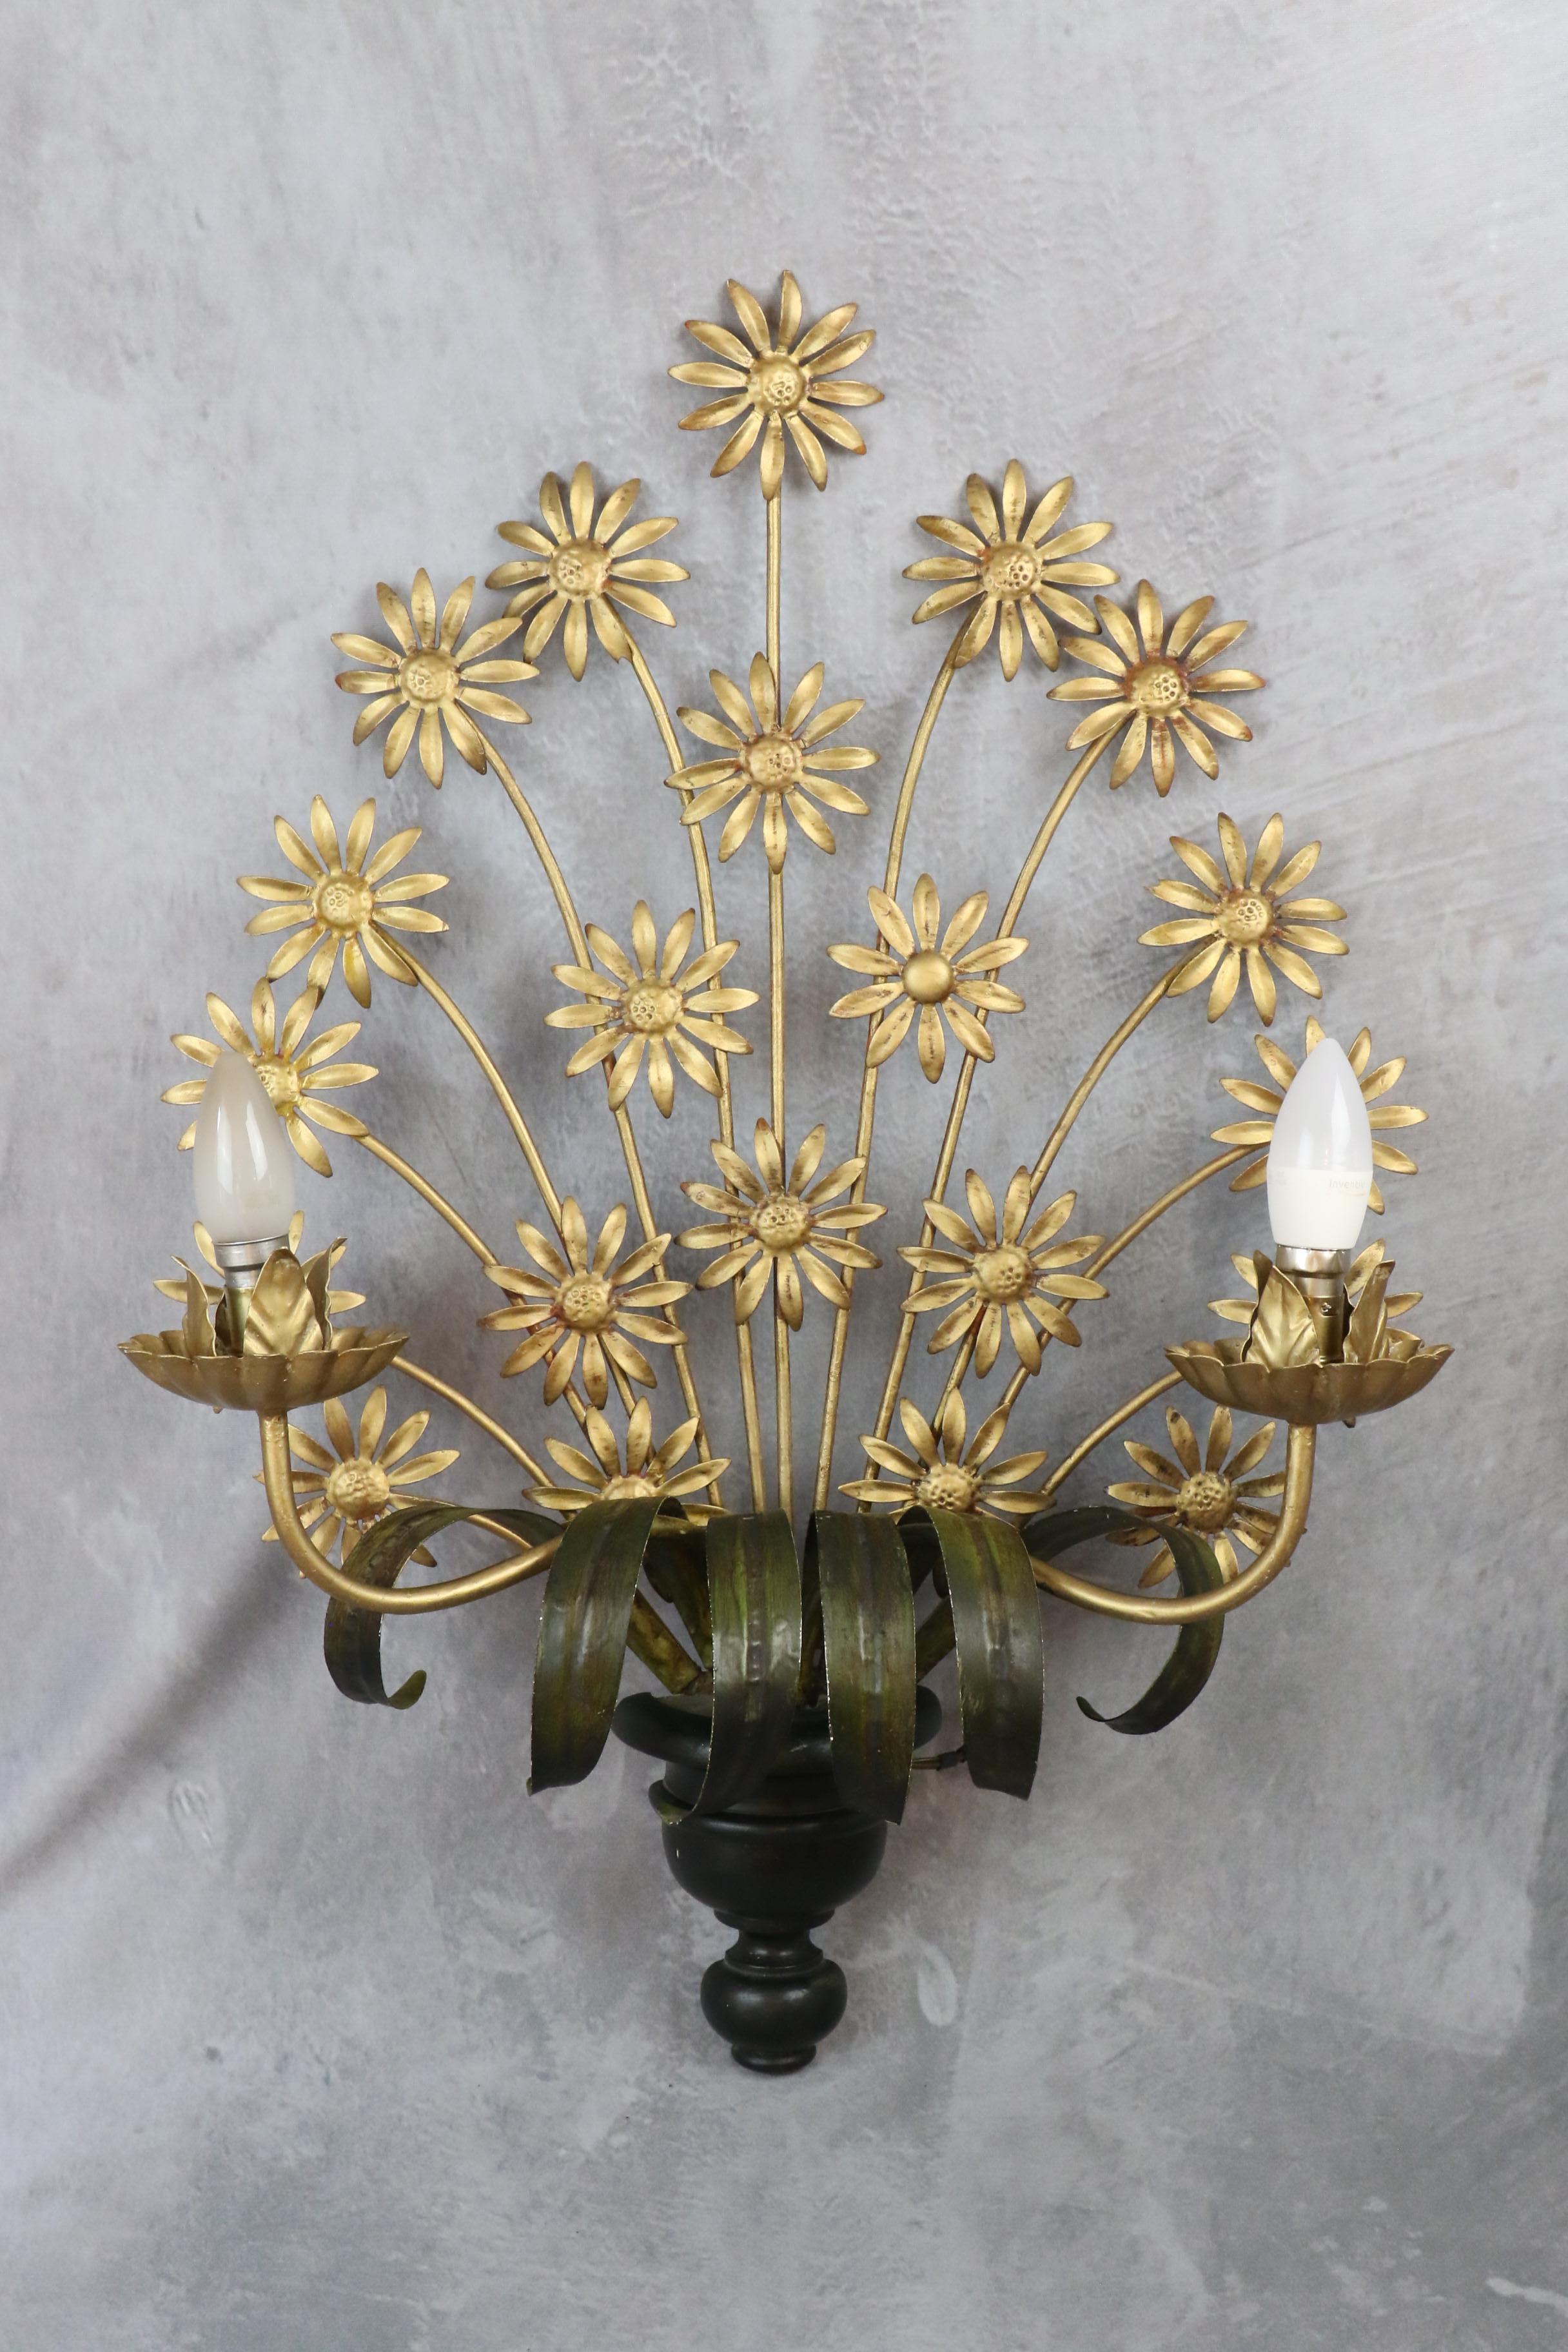 1940's french Hollywood Regency wall lamp, golden daisies bouquet

Stunning wall sconce in gilded metal. stunning by it size, it's a beautiful object whether it's on or off.